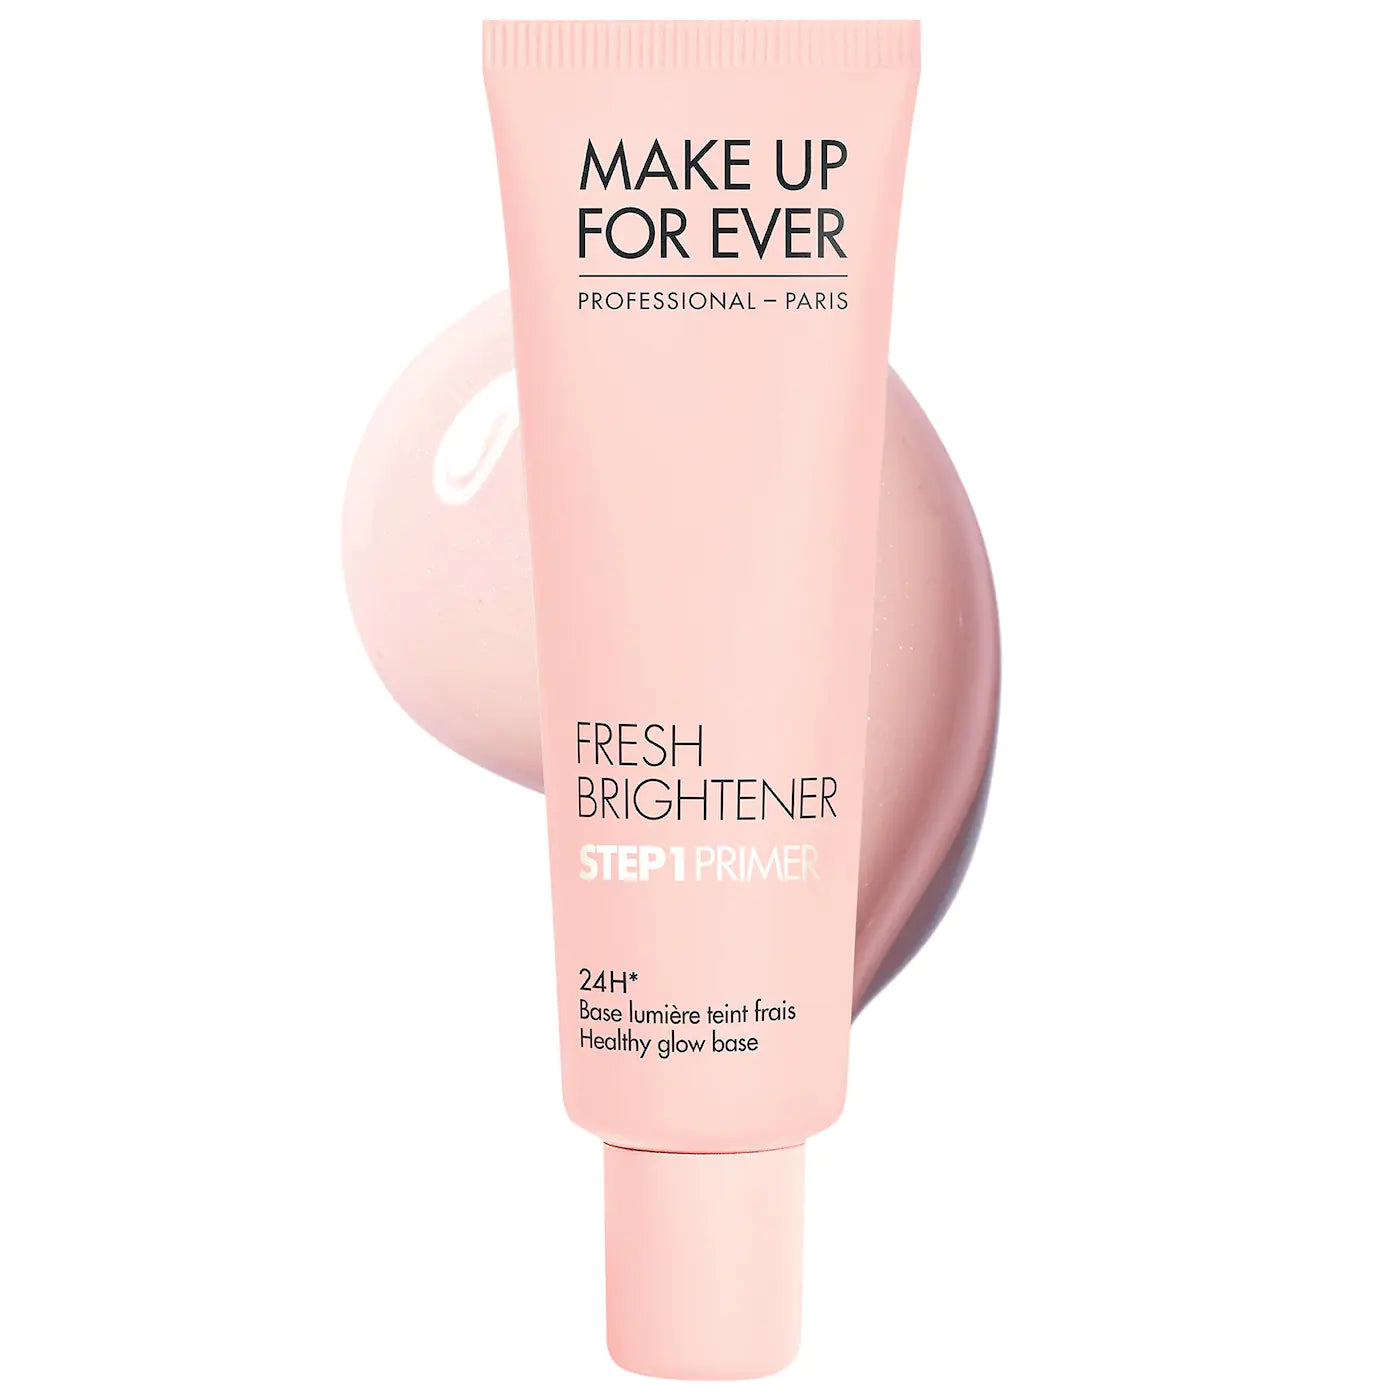 10 Make Up For Ever Step 1 Primers - Into The Gloss